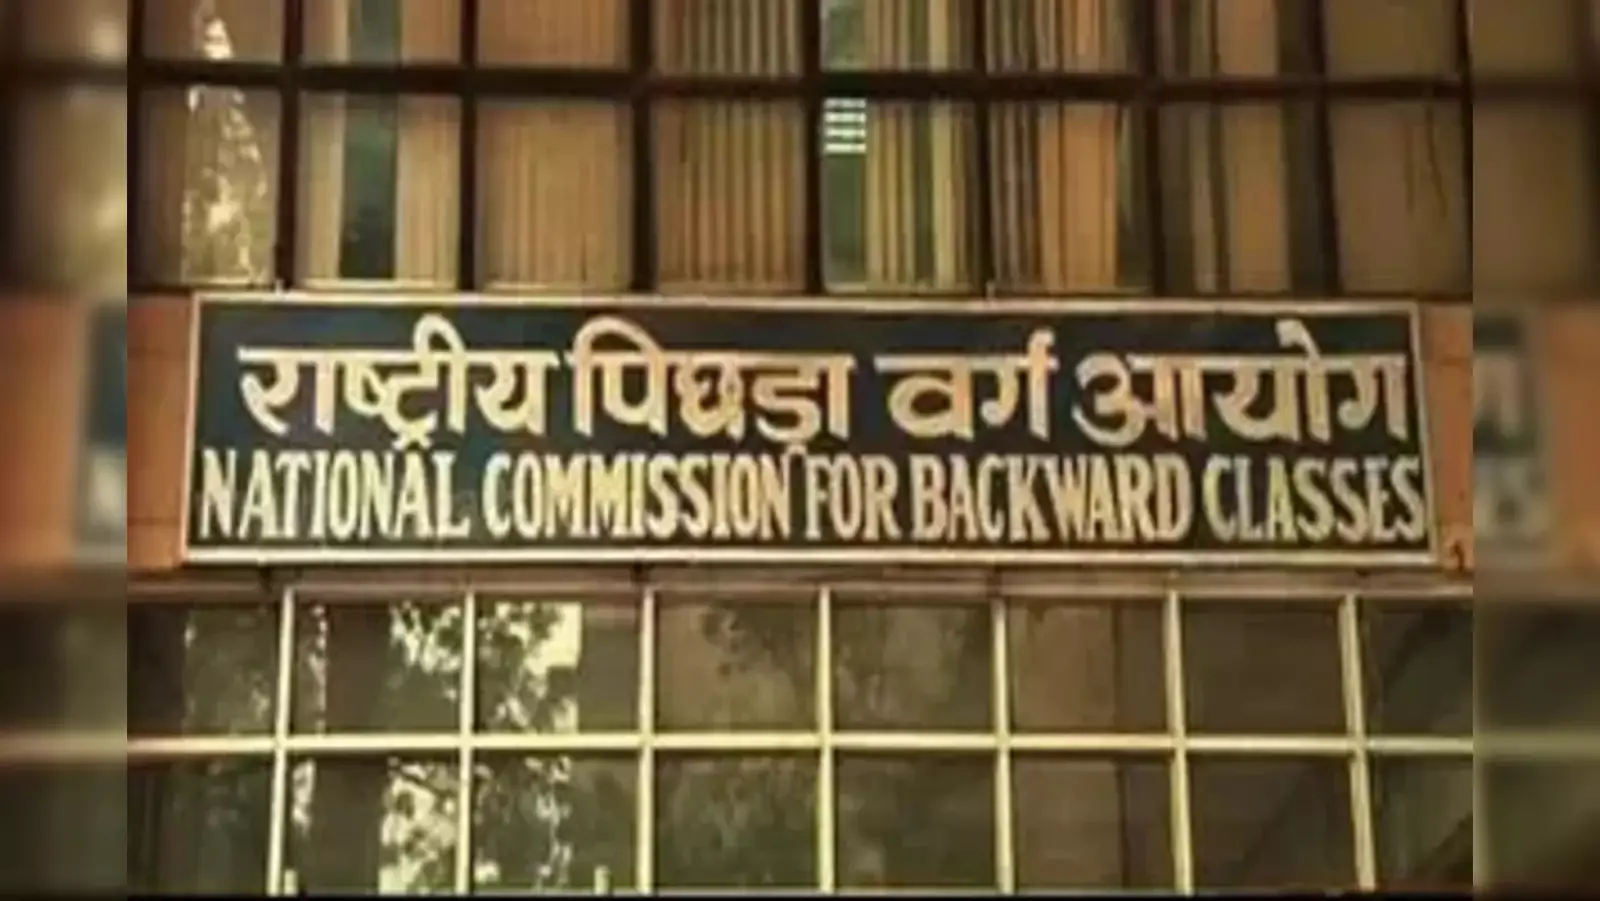 NCBC: Backward Classes Commission recommended increasing OBC quota in Bengal and Punjab, know what is the situation now